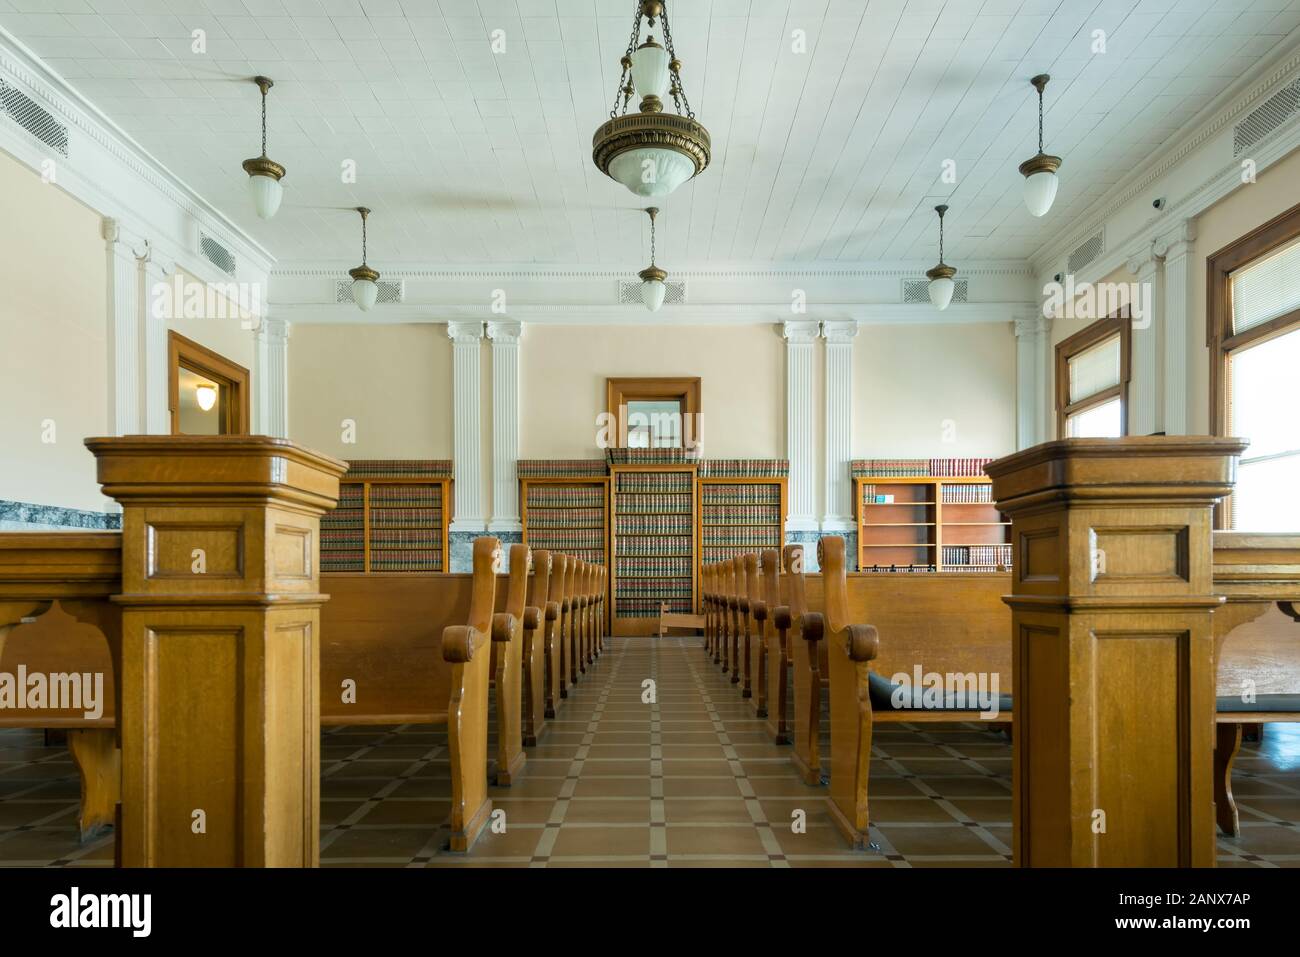 The Dalles, Oregon - April 22, 2016: Lawbooks Shelved at the Back of a Courtroom in the Wasco County Courthouse Stock Photo